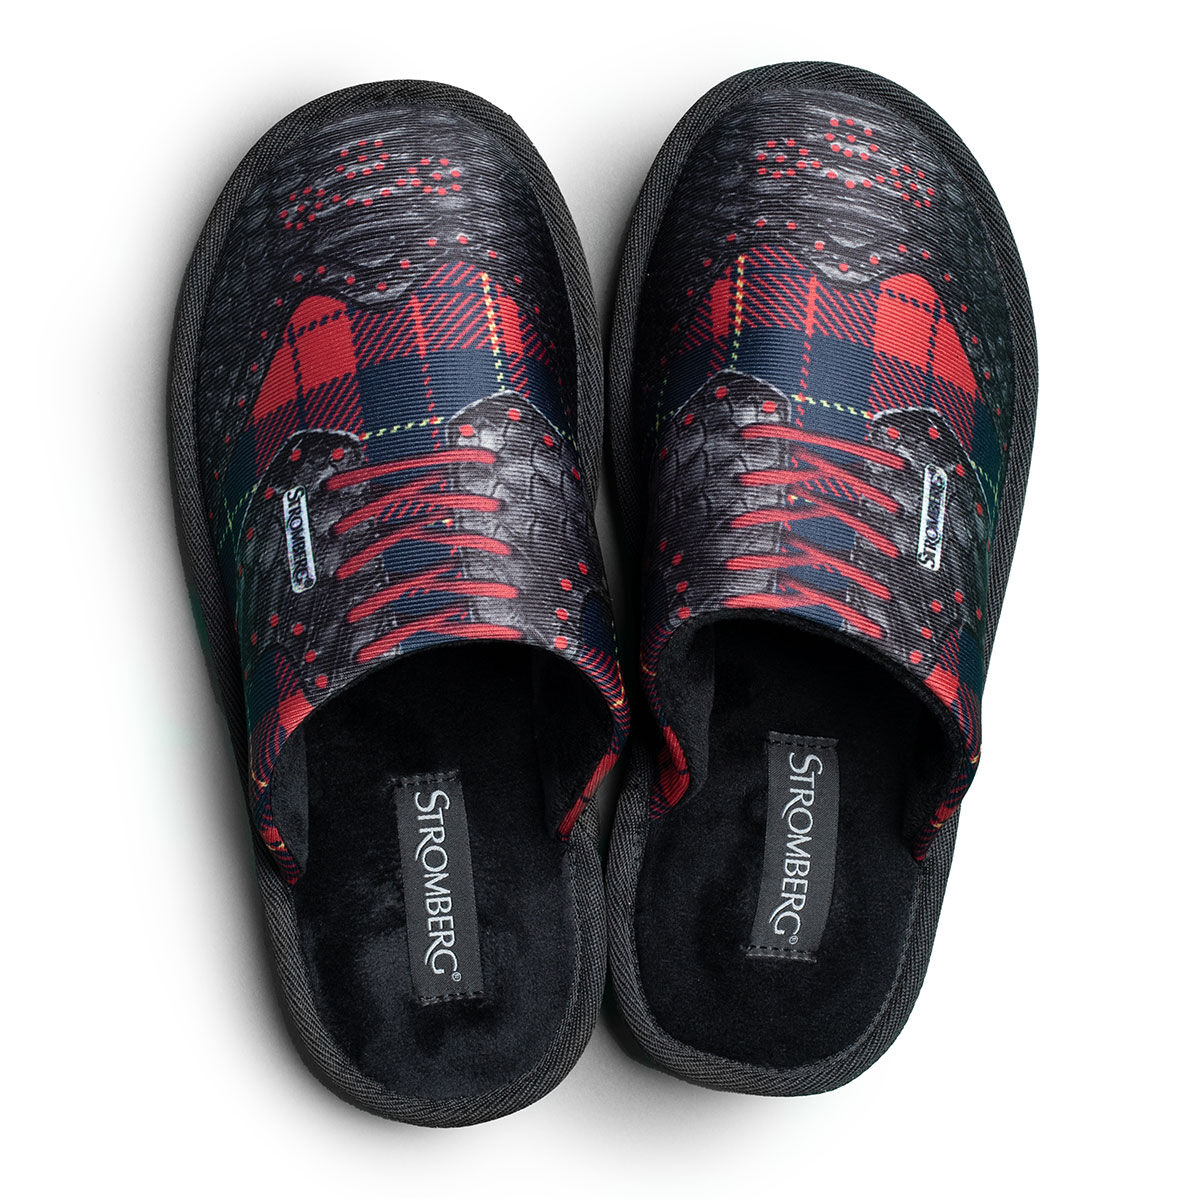 Stromberg Black, Grey and Red Comfortable Tartan Mule Golf Slippers, Size: 8 | American Golf